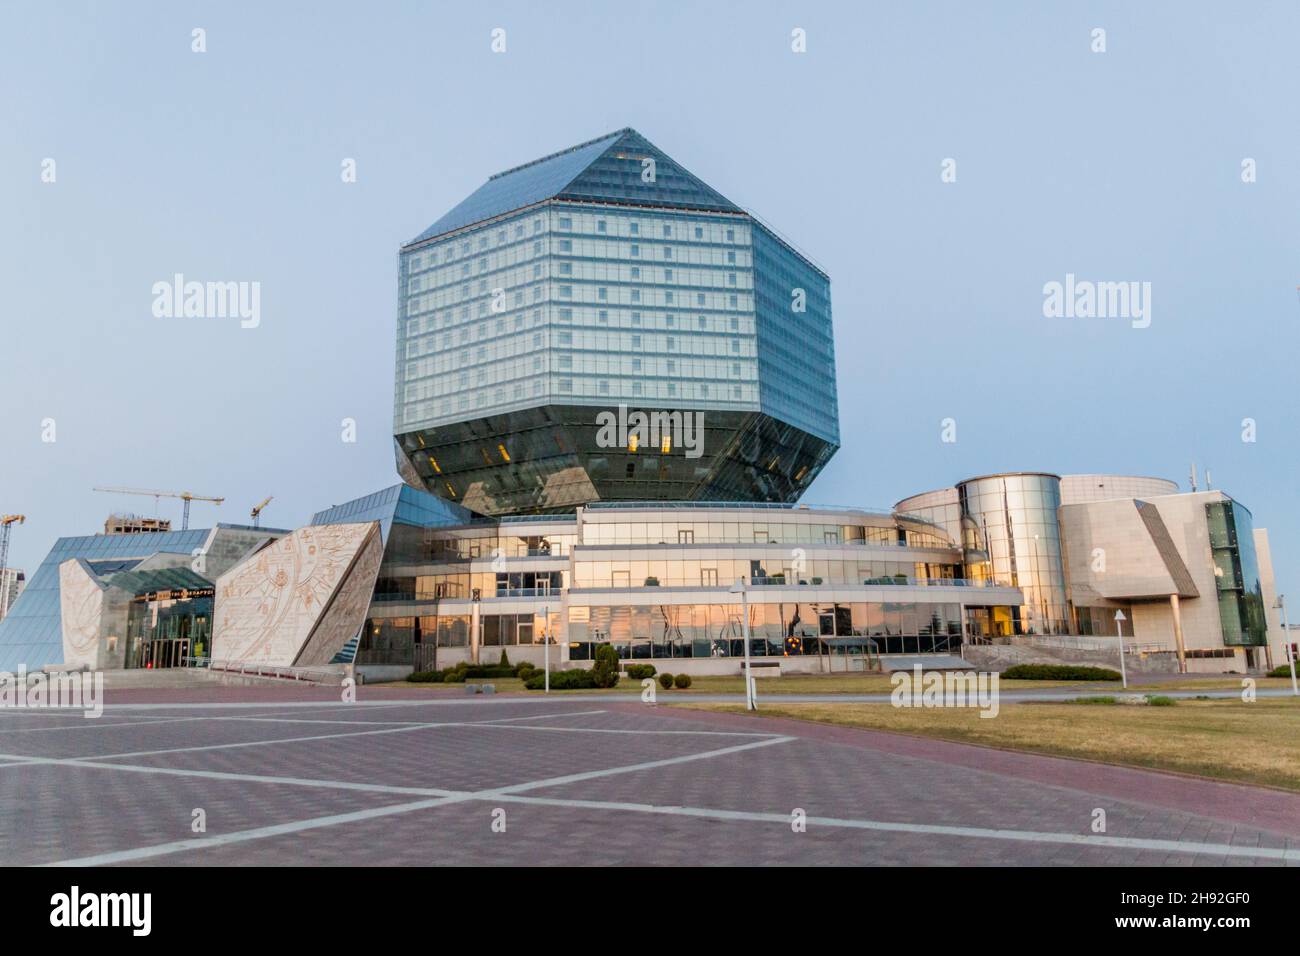 Building of the National Library of Belarus in Minsk Stock Photo